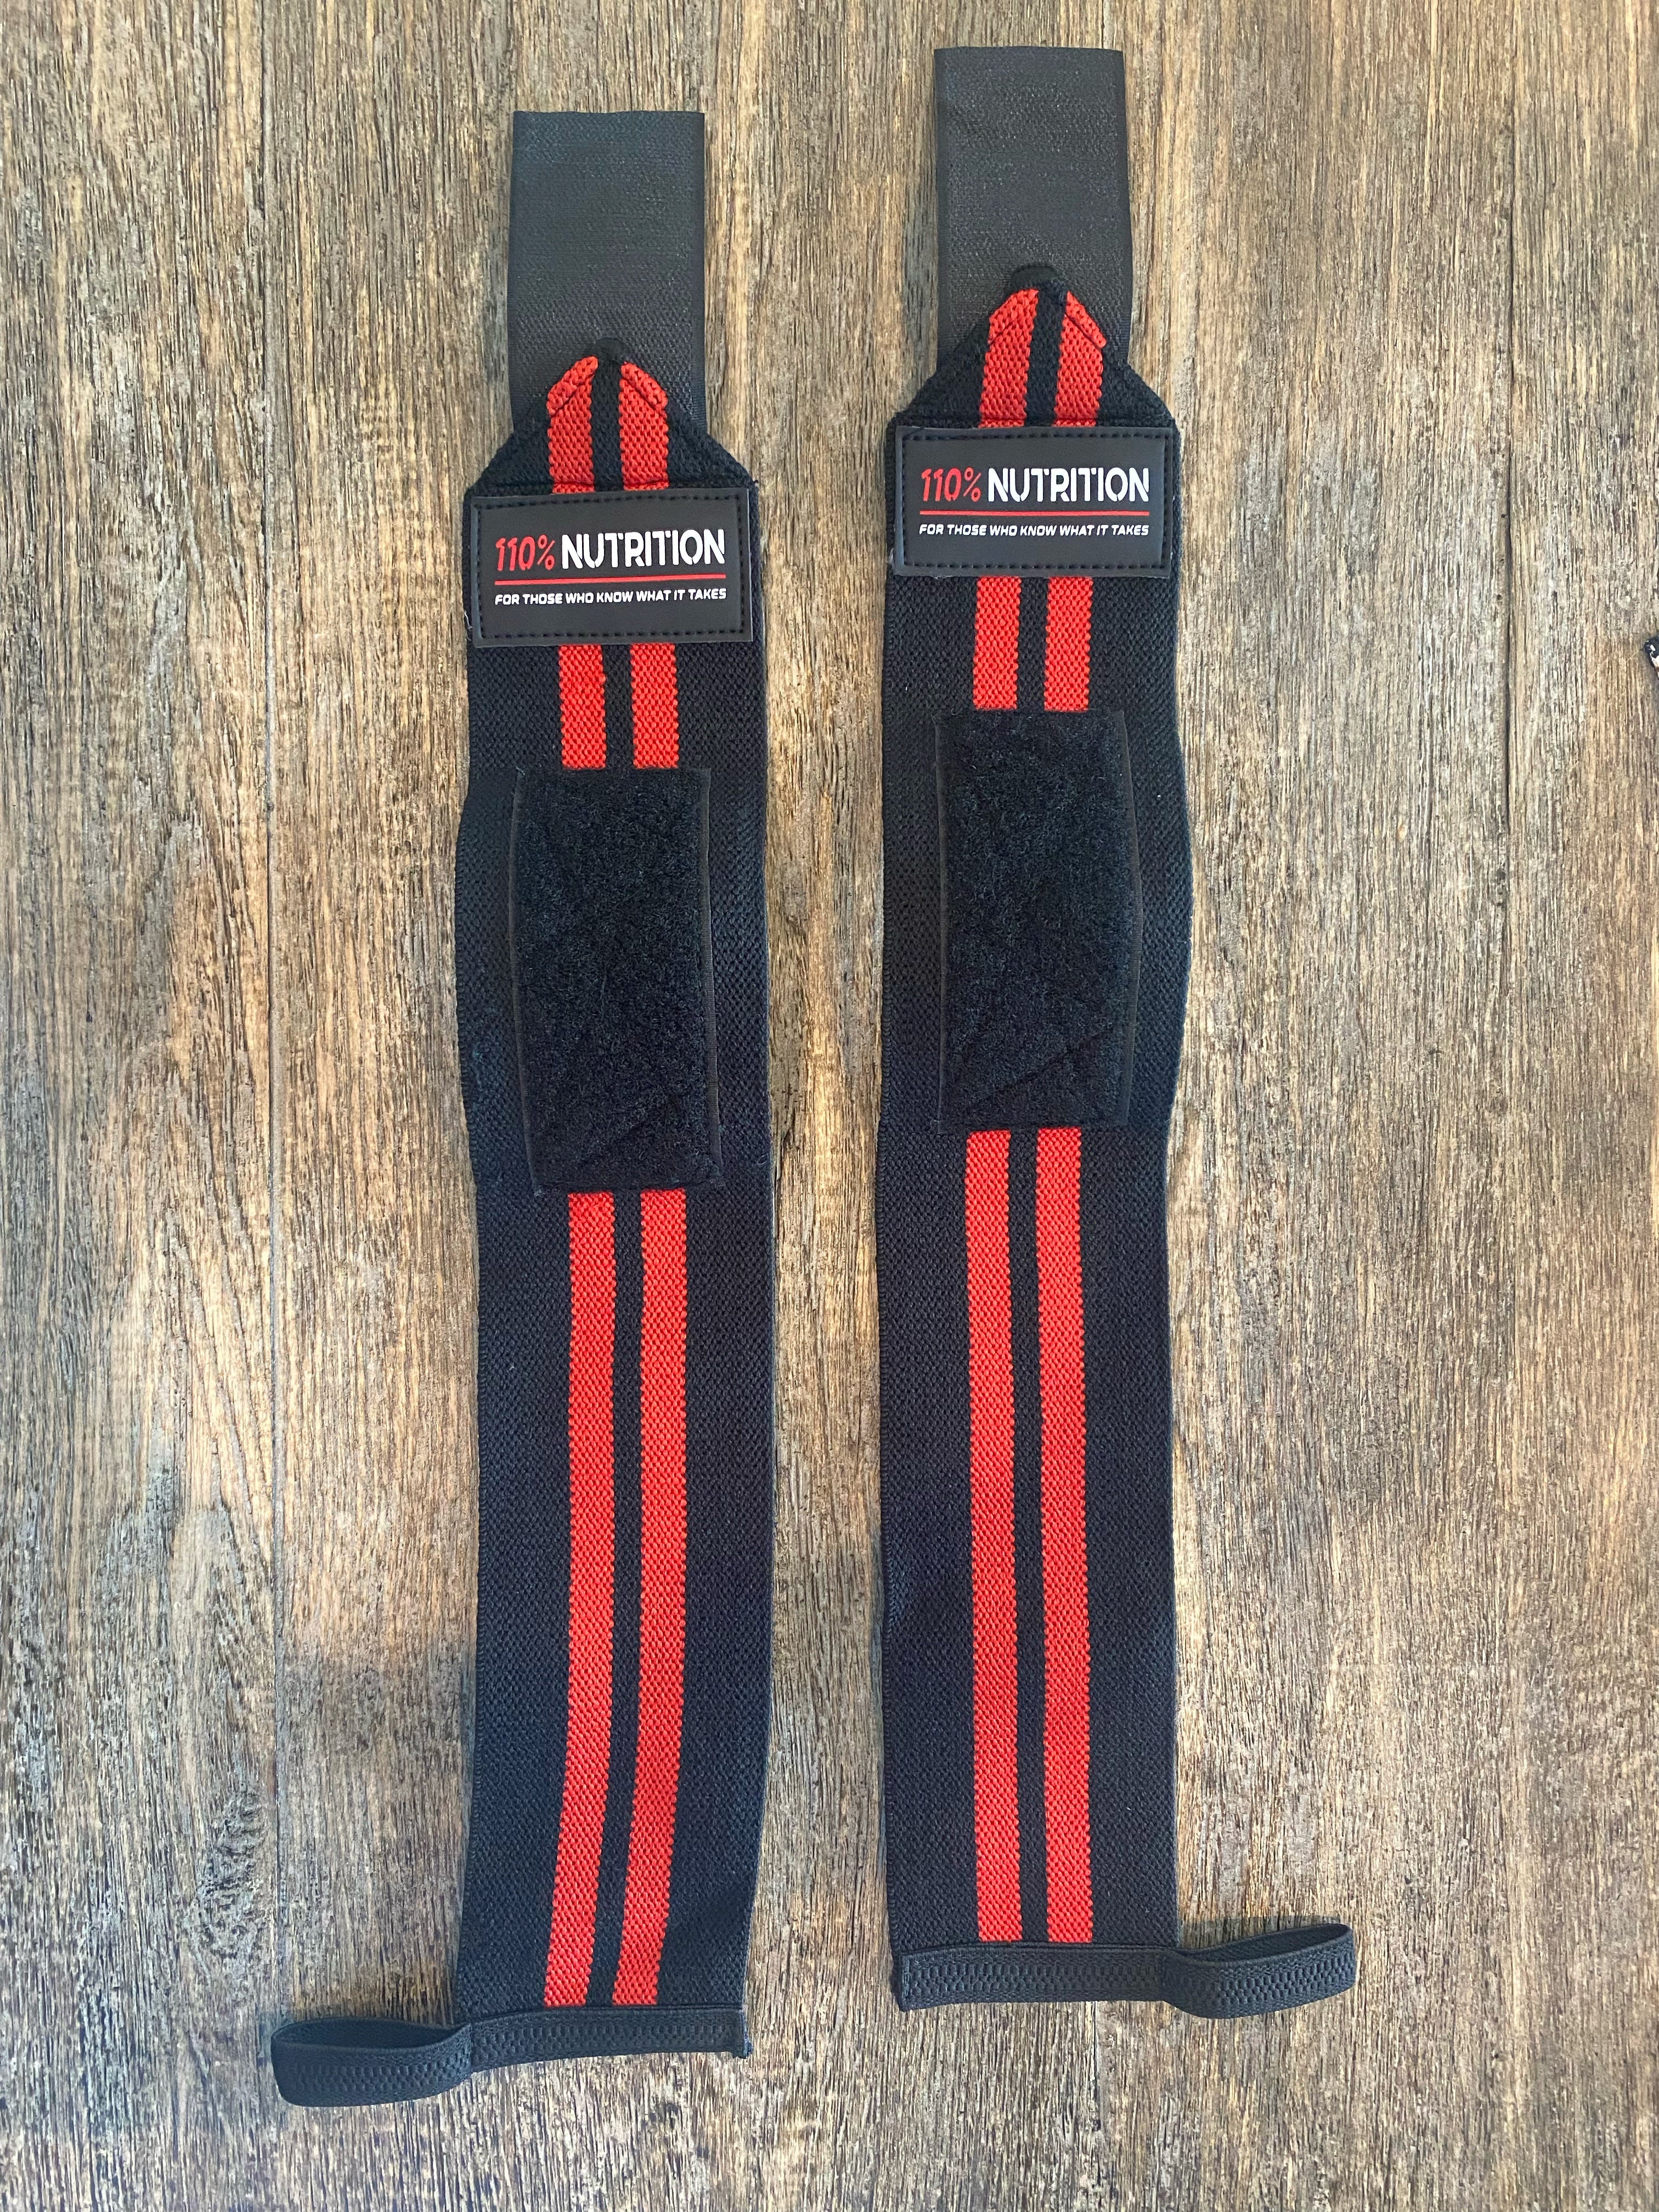 Wrist Wraps - Black and Red